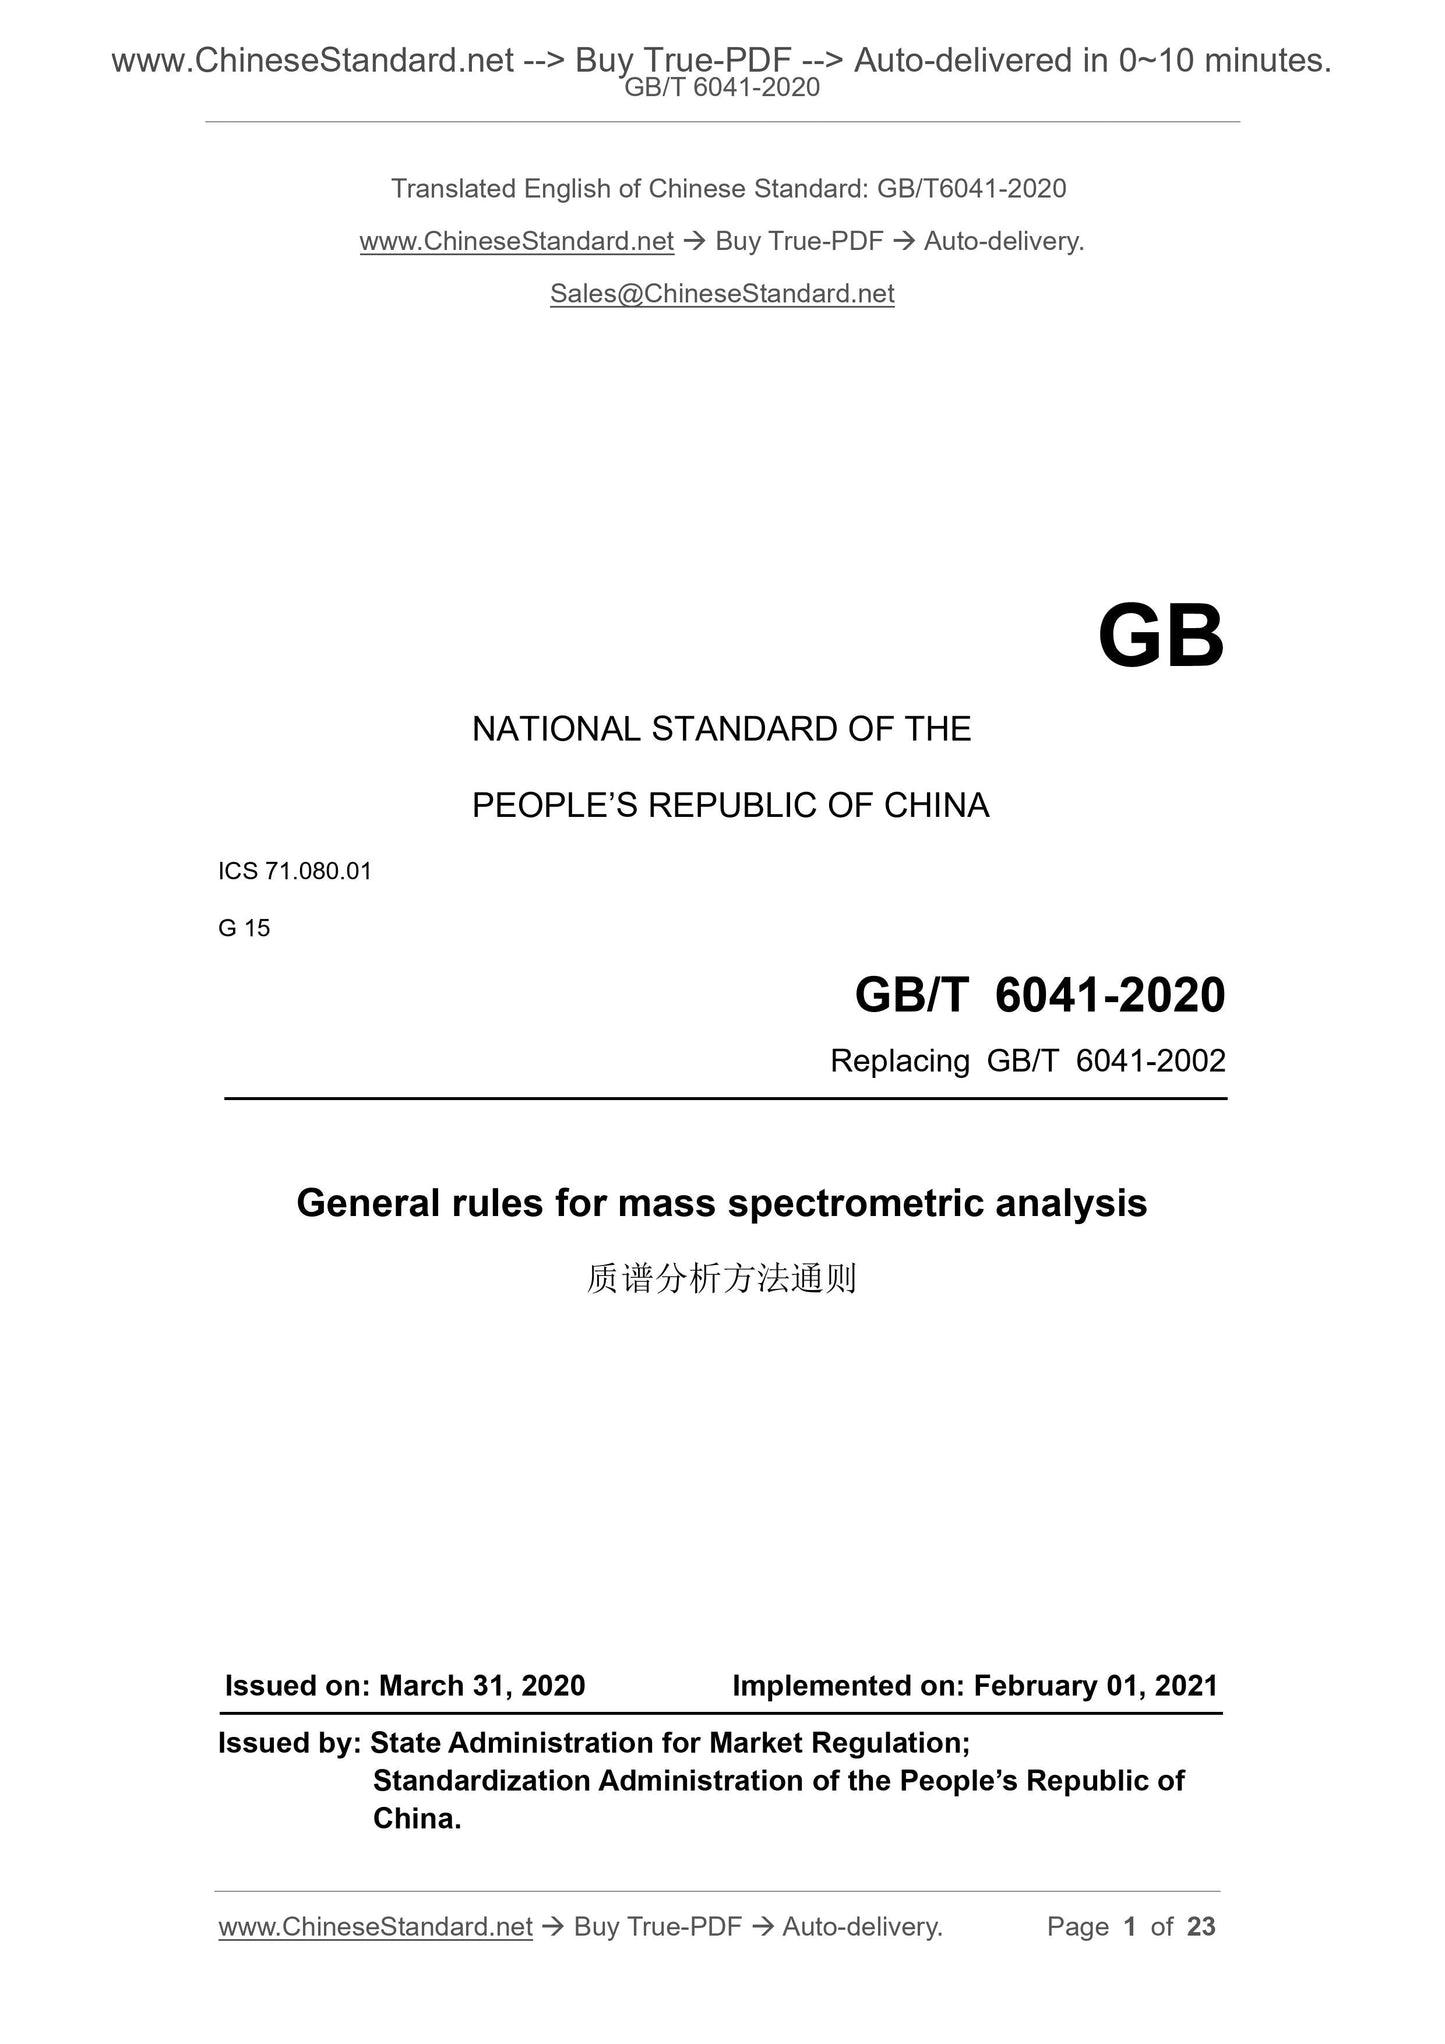 GB/T 6041-2020 Page 1